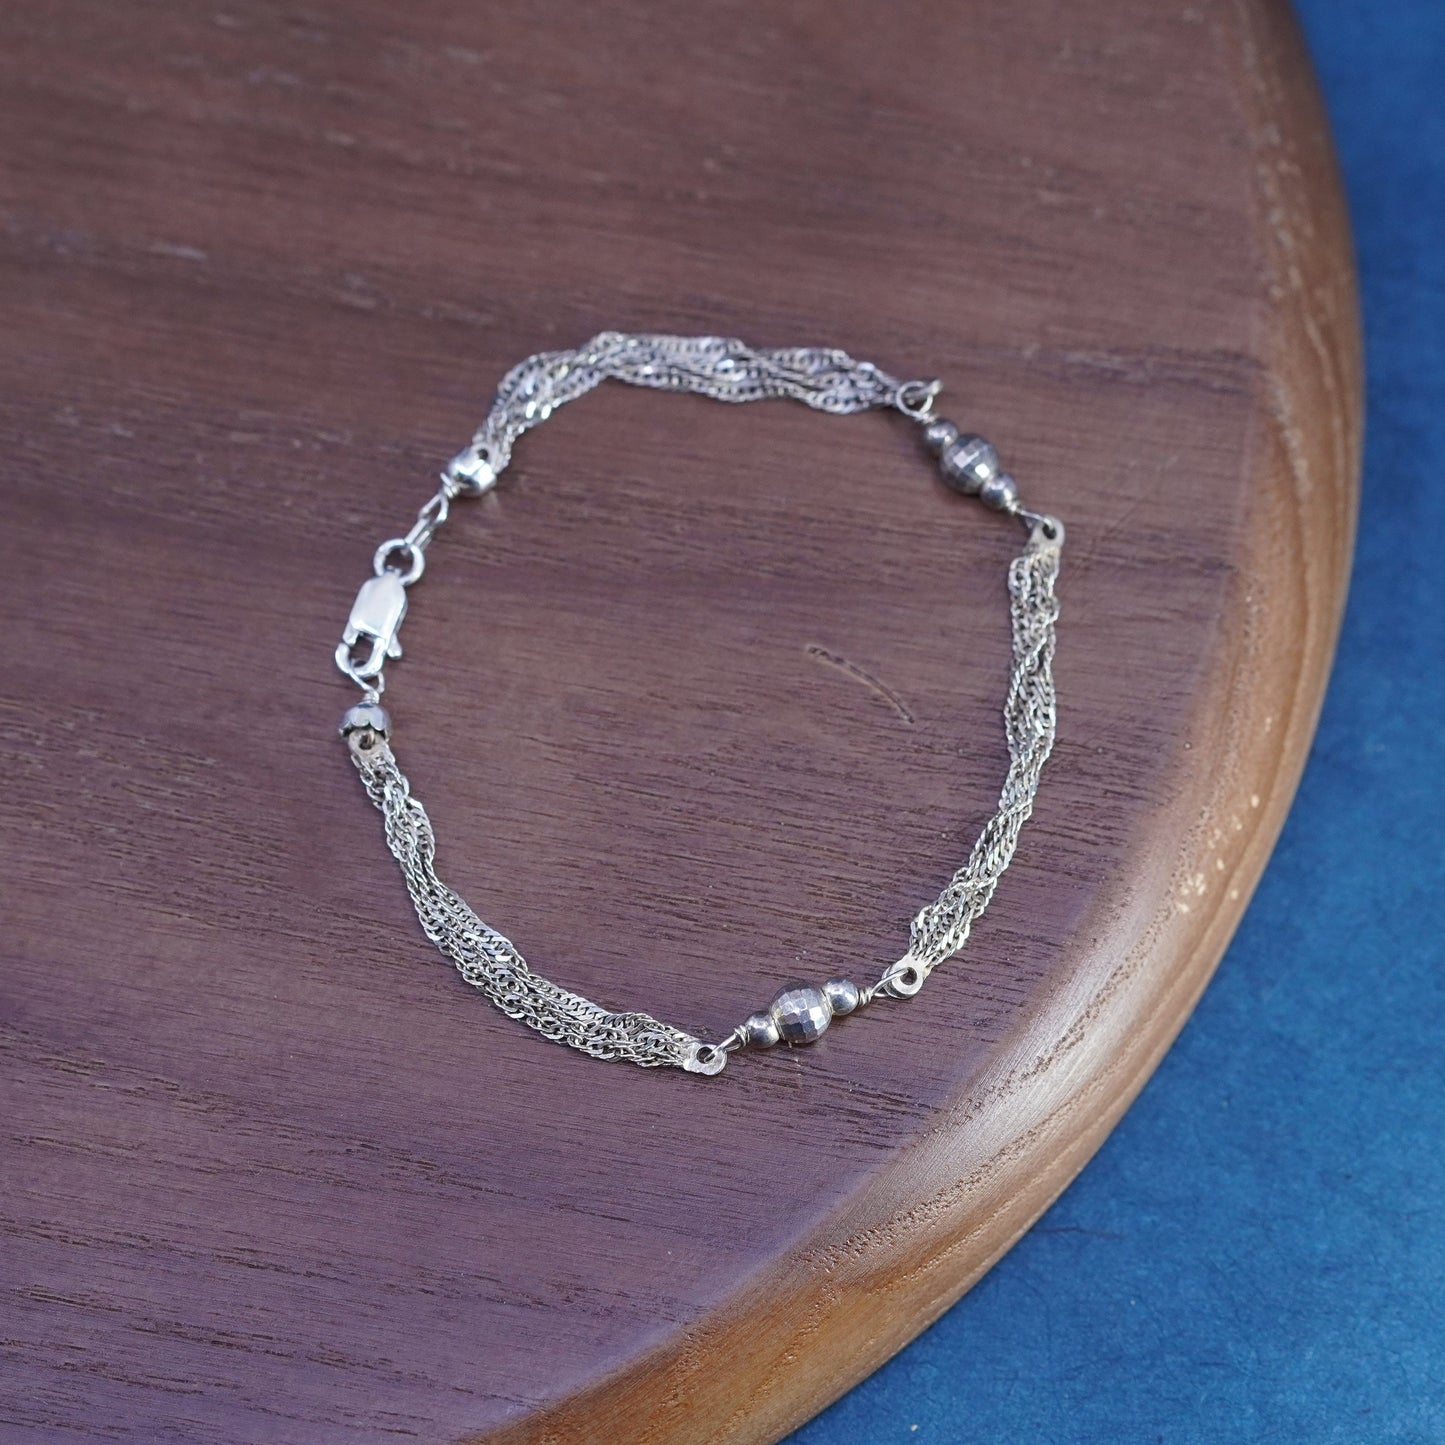 7.5”, vintage Sterling silver handmade bracelet, 925 twisted curb chain beads